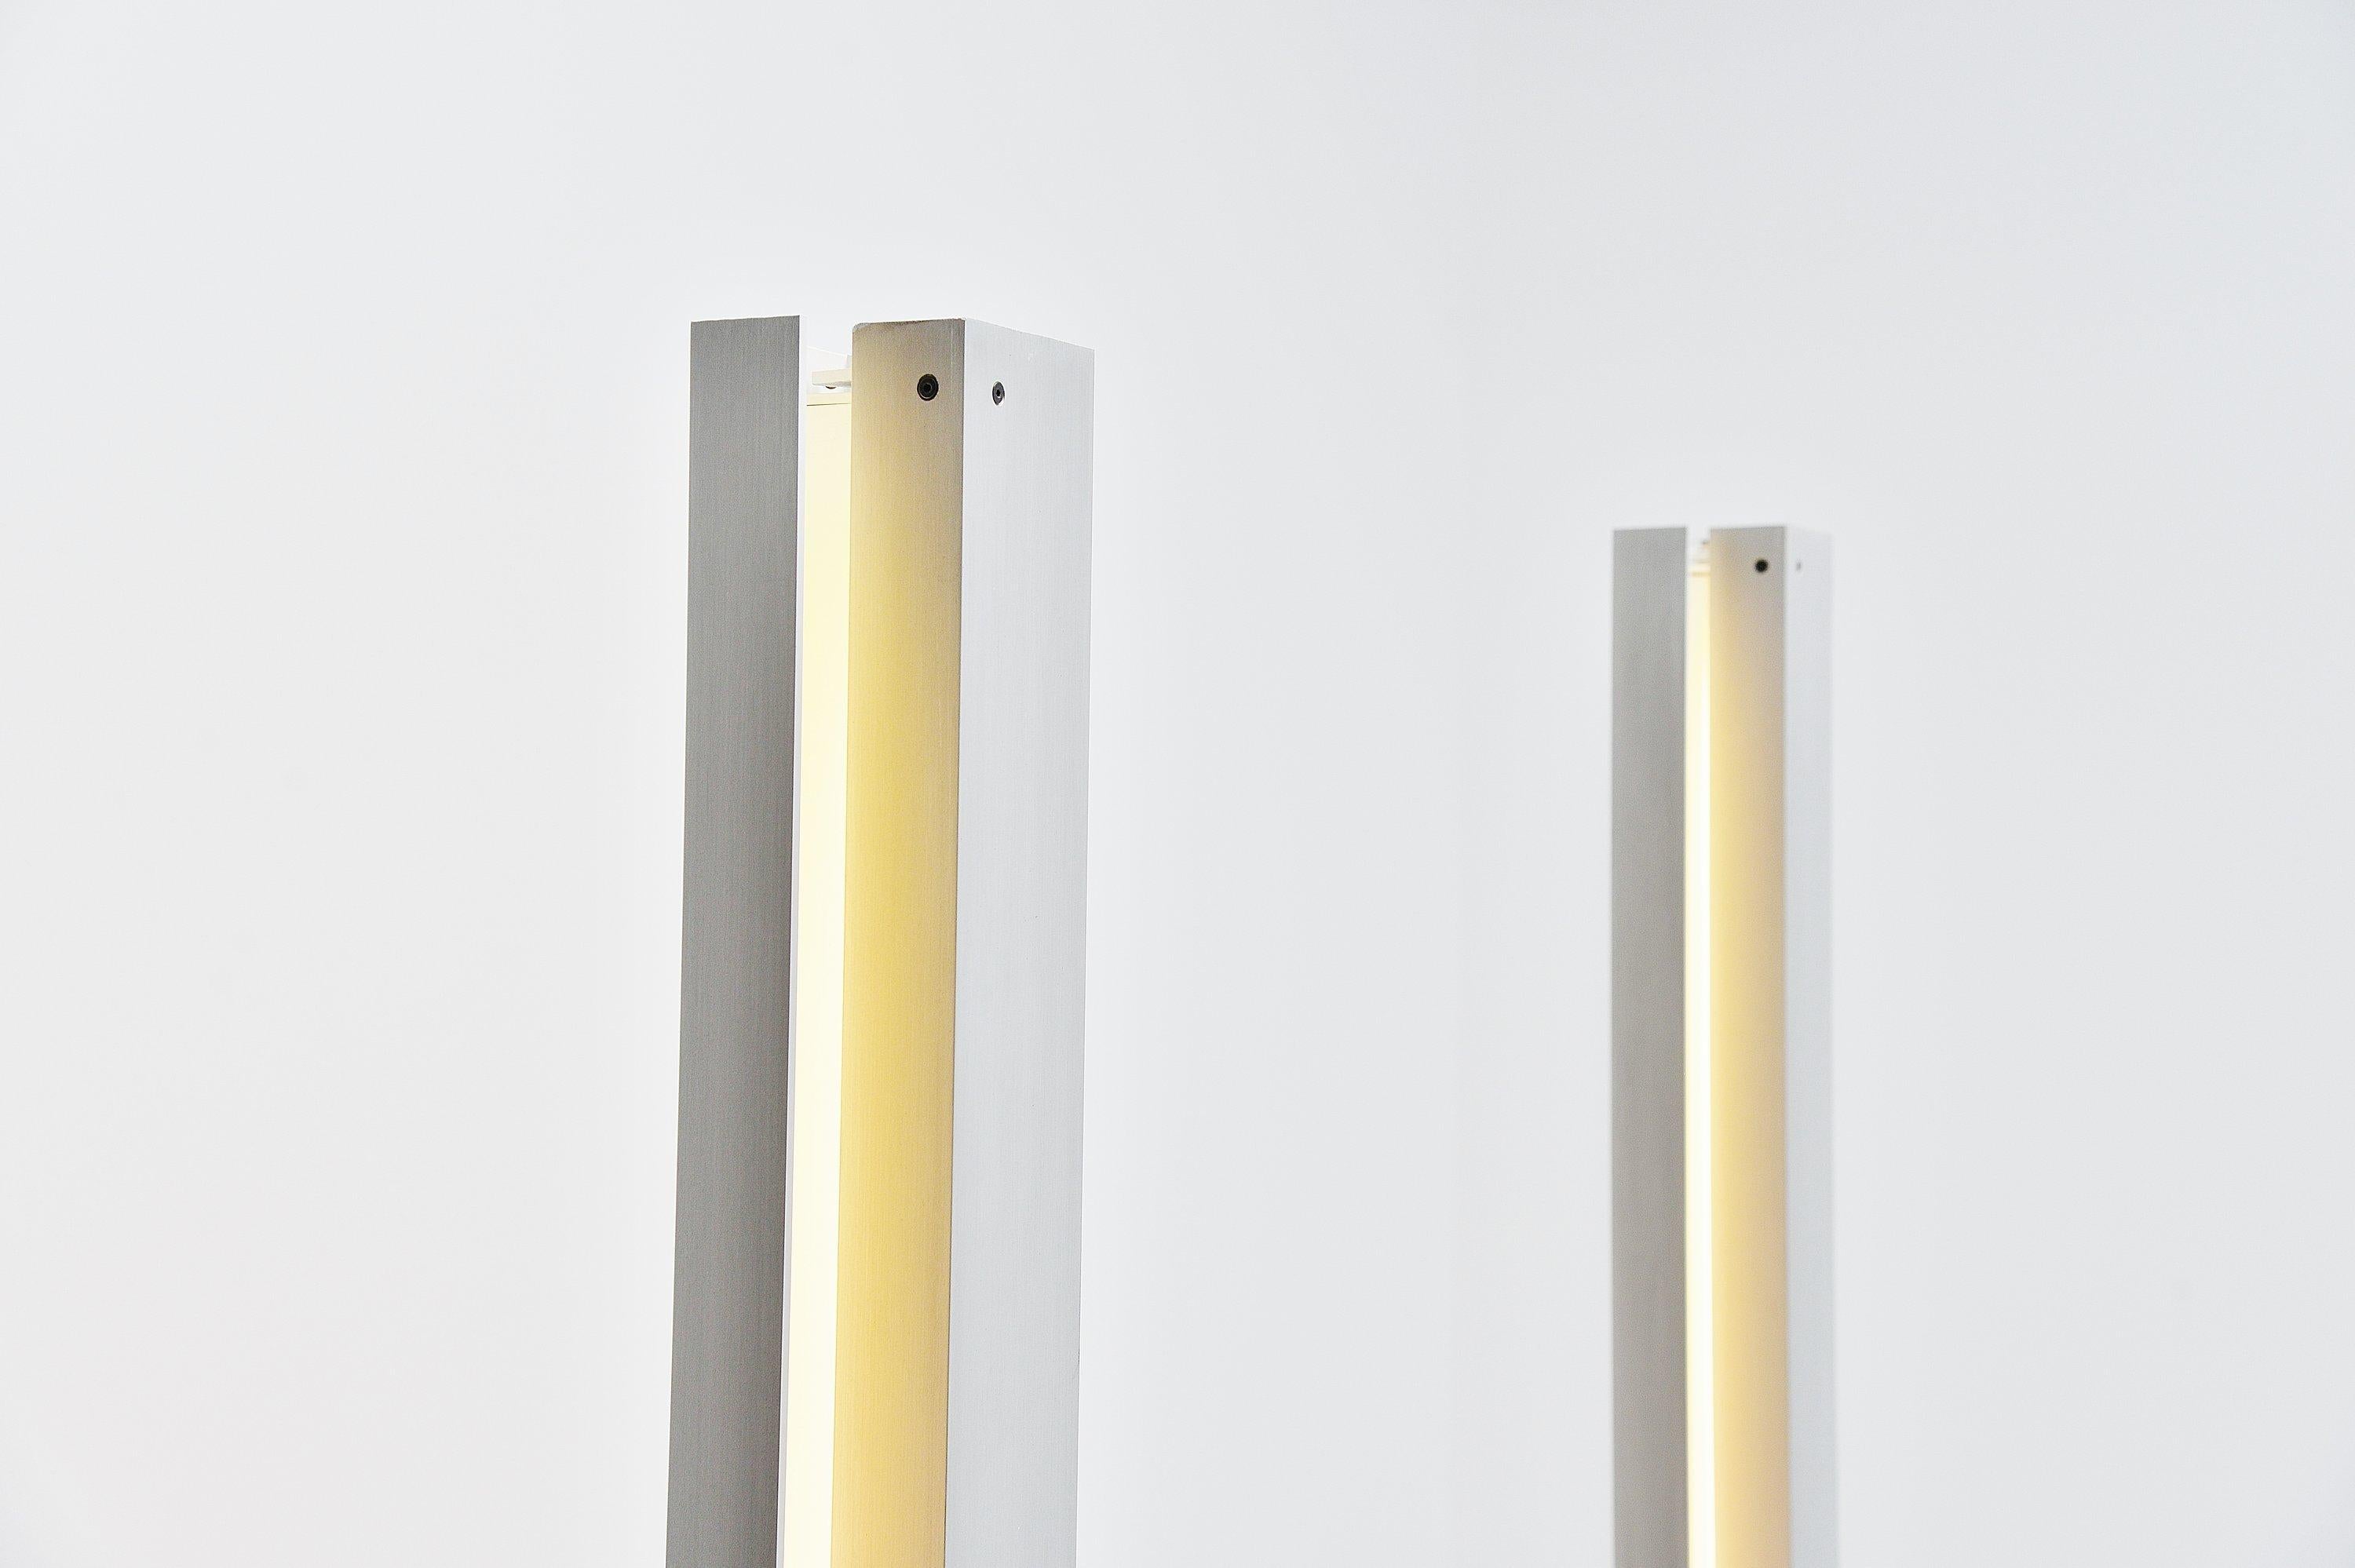 Minimalist floor lamps designed by Angelo Brotto and manufactured by Esperia, Italy, 1971. The floor lamps are made of aluminium tubular adjustable frames for different light positioning and the base is made of weighted metal, black painted.